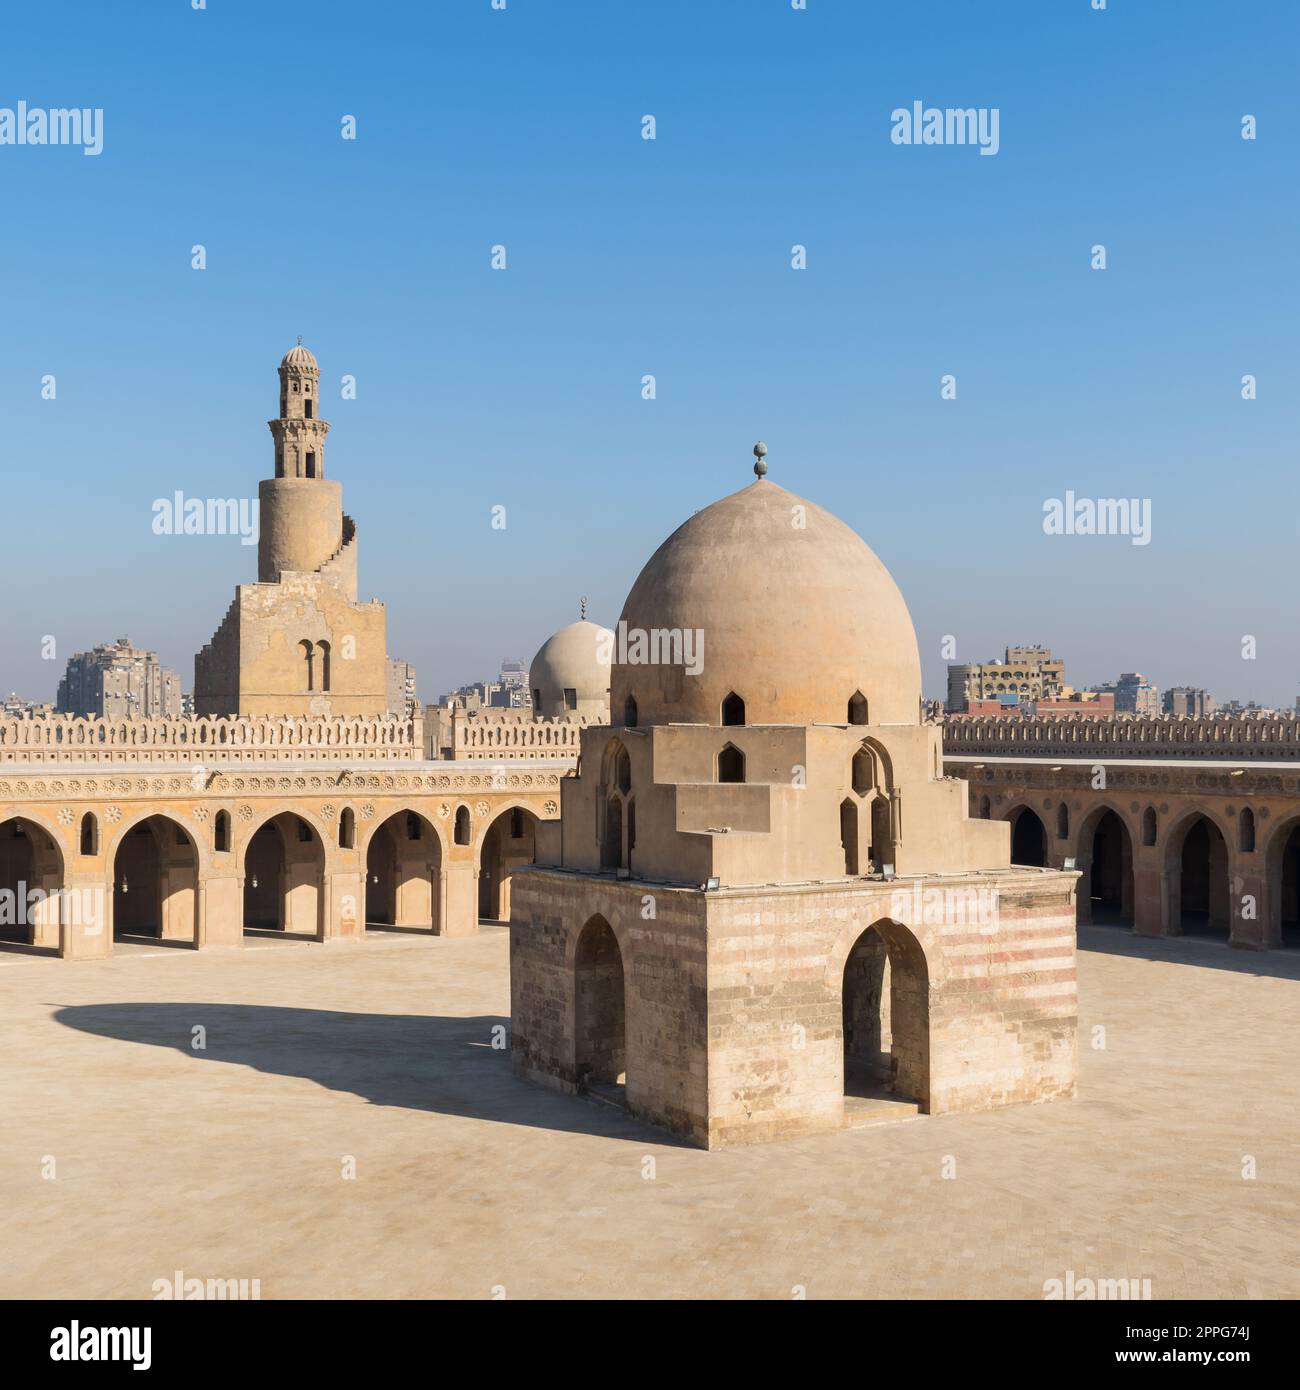 Courtyard of Ibn Tulun public historical mosque with ablution fountain and the minaret, Cairo, Egypt Stock Photo